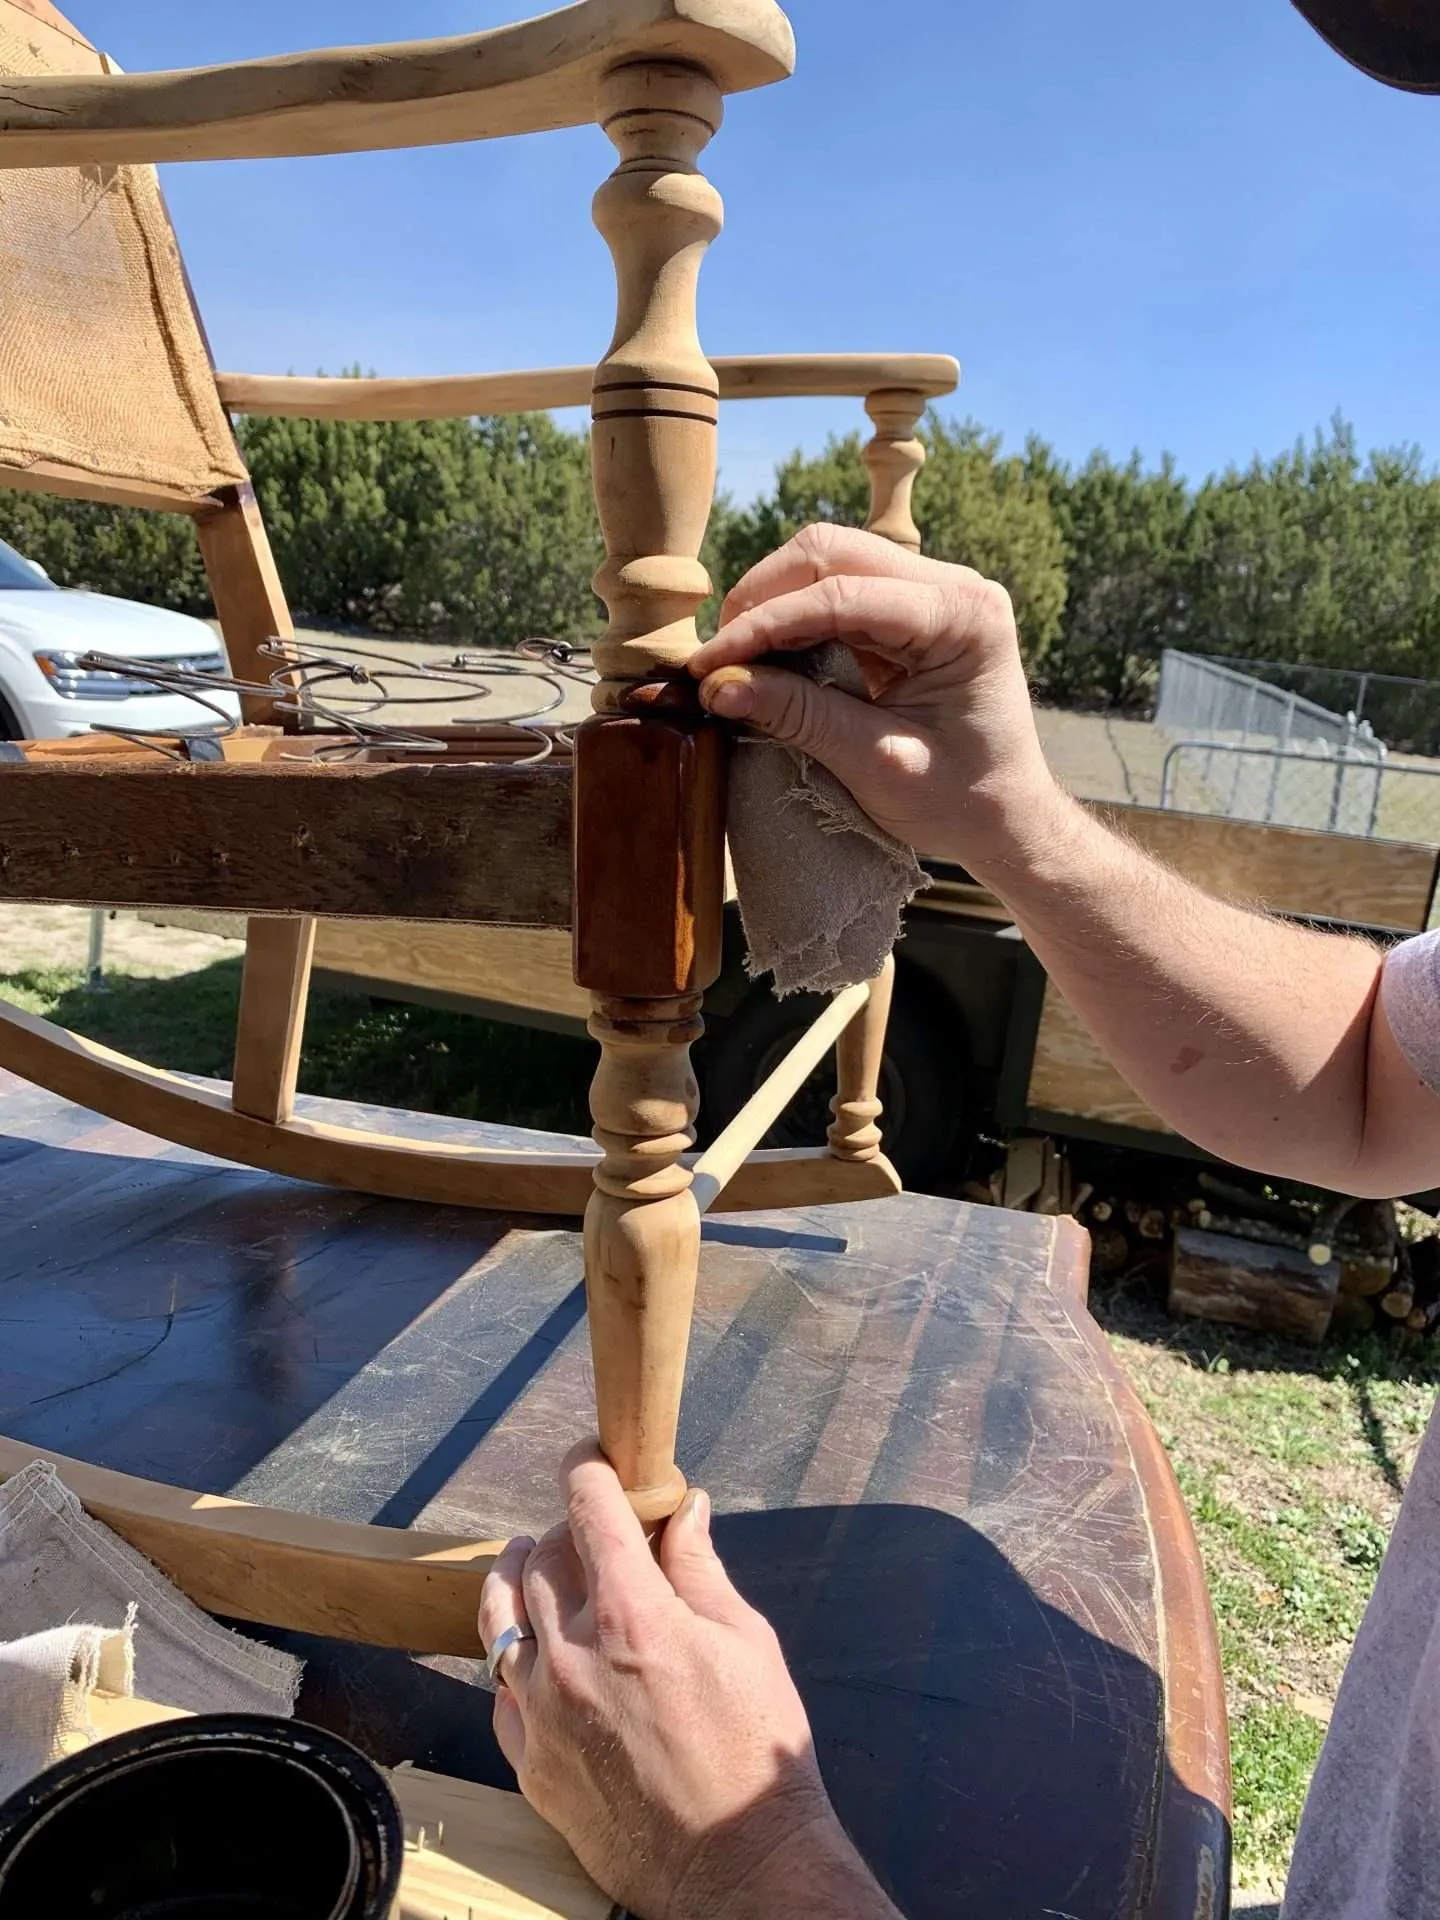 Staining the wood of an antique rocking chair.